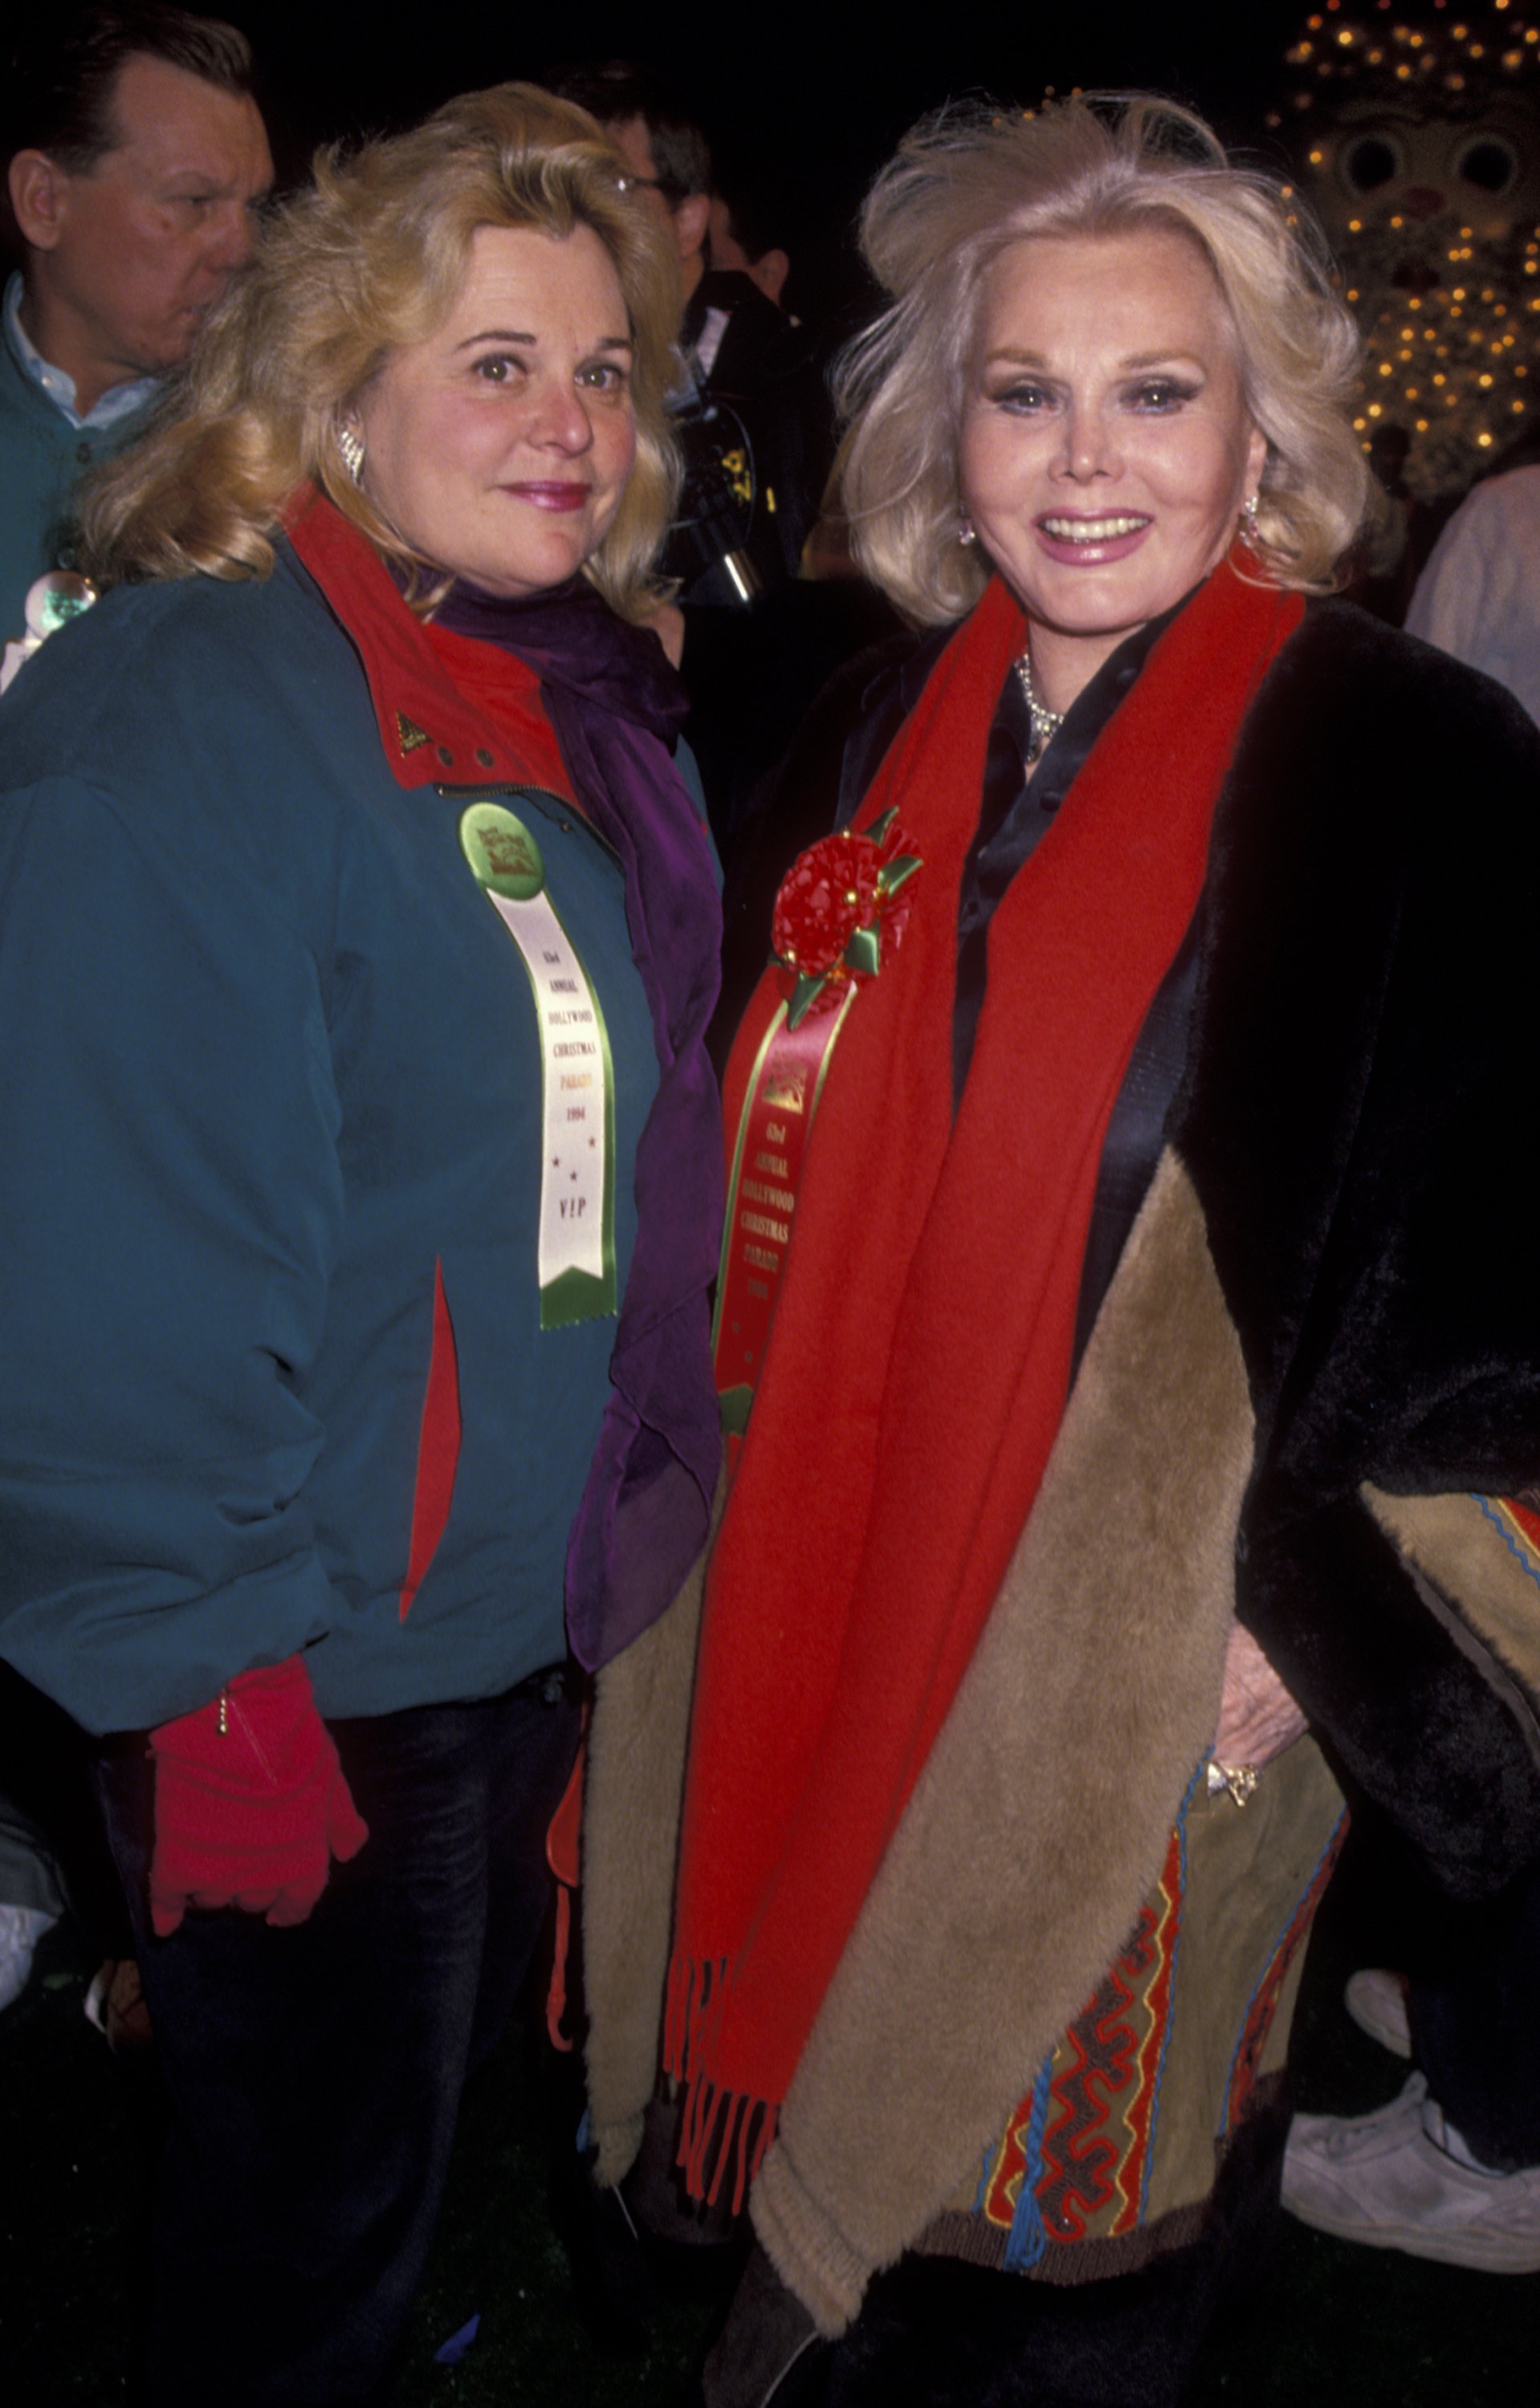 Francesca Hilton and Zsa Zsa Gabor at the 63rd Annual Hollywood Christmas Parade on November 27, 1994, in Hollywood, California. | Source: Ron Galella, Ltd./Ron Galella Collection/Getty Images